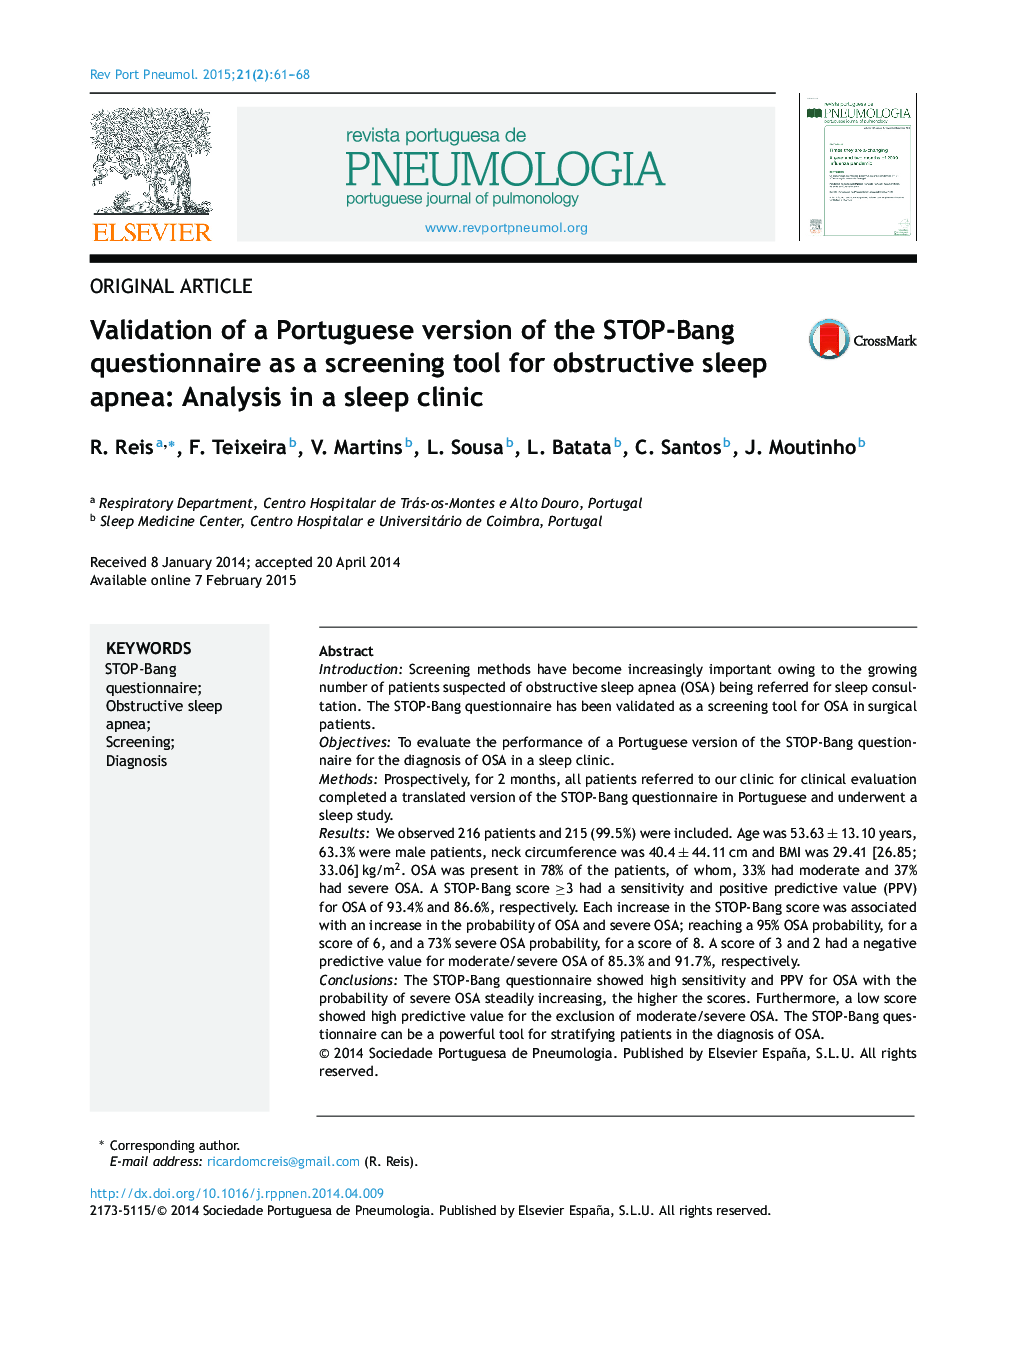 Validation of a Portuguese version of the STOP-Bang questionnaire as a screening tool for obstructive sleep apnea: Analysis in a sleep clinic